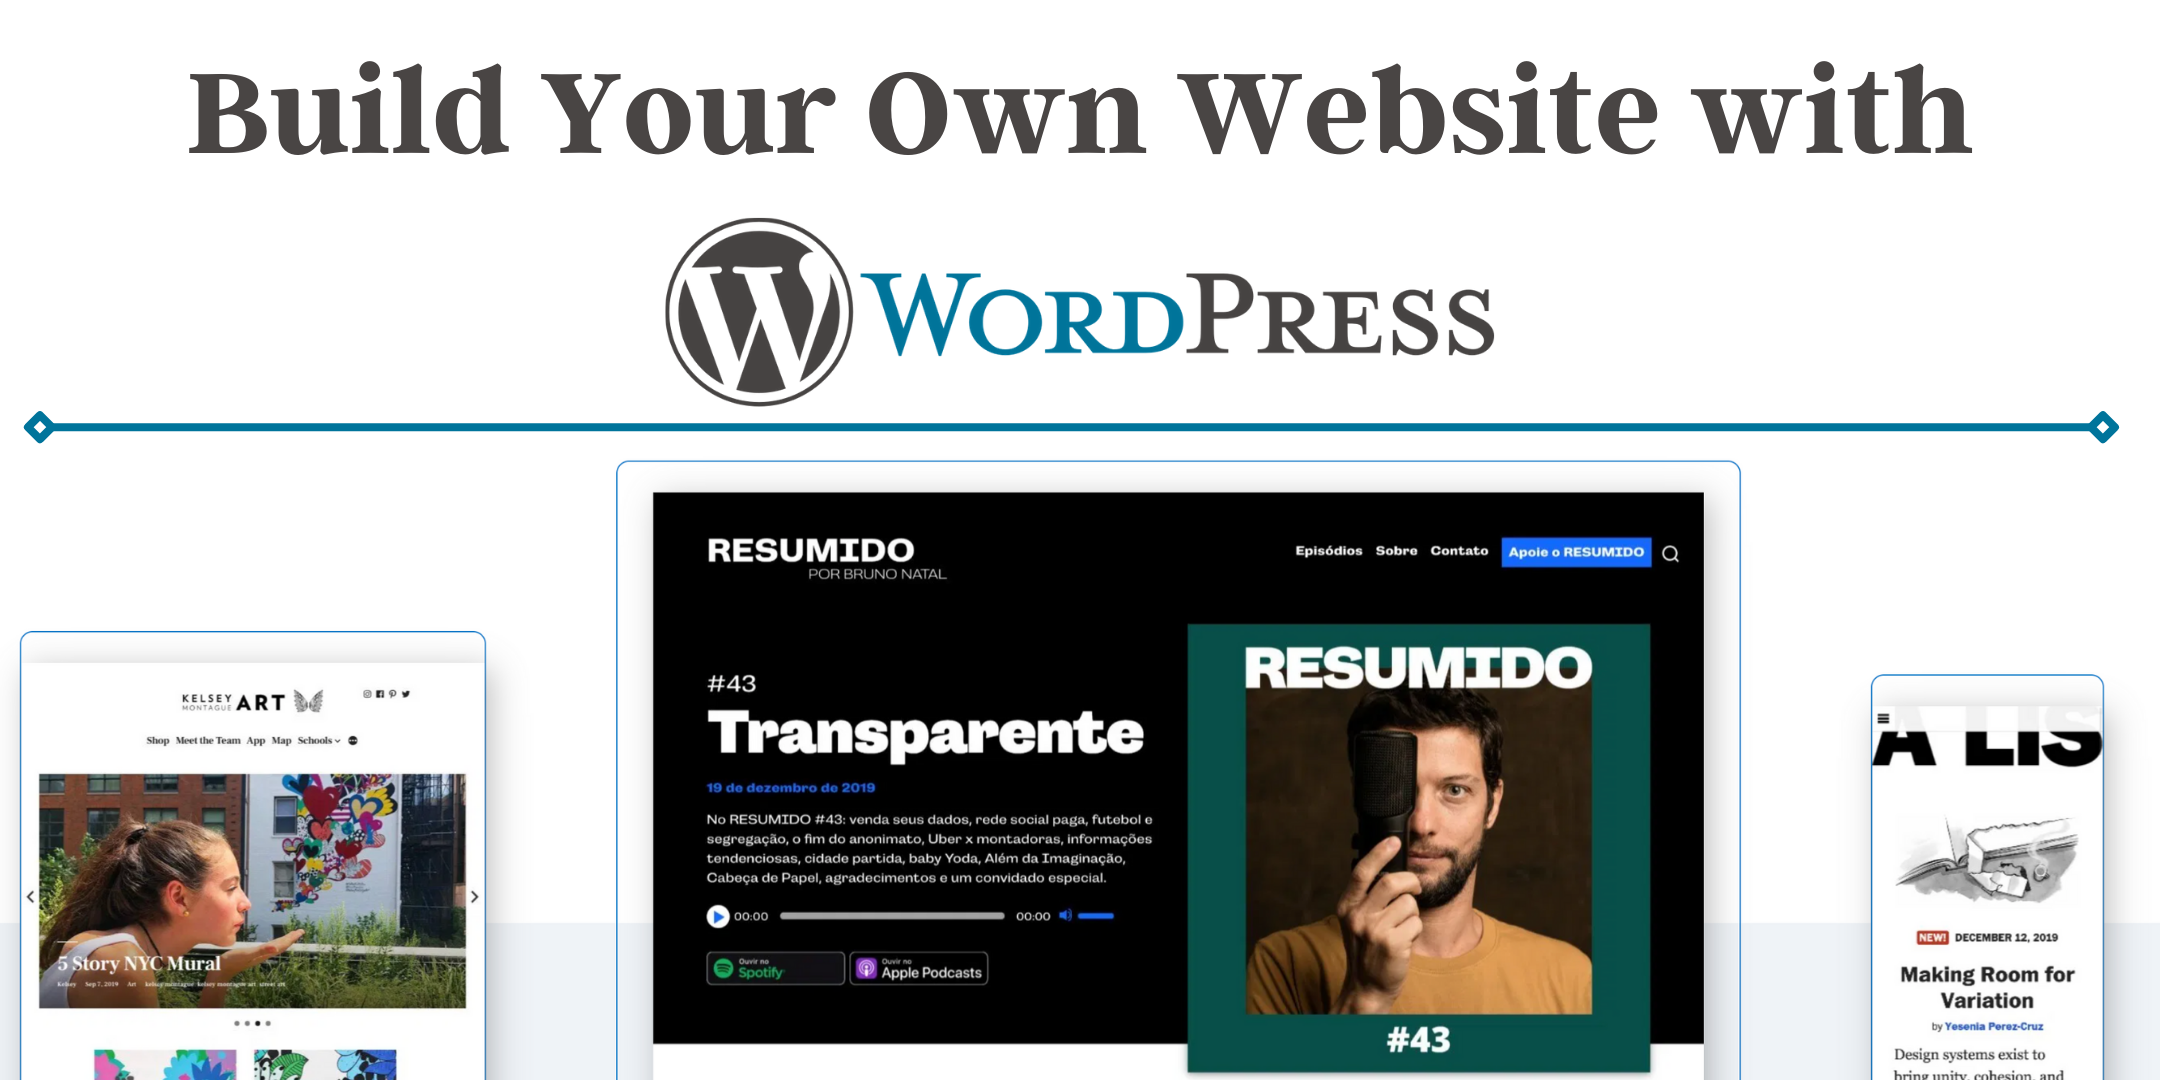 Build Your Own Website with Wordpress image